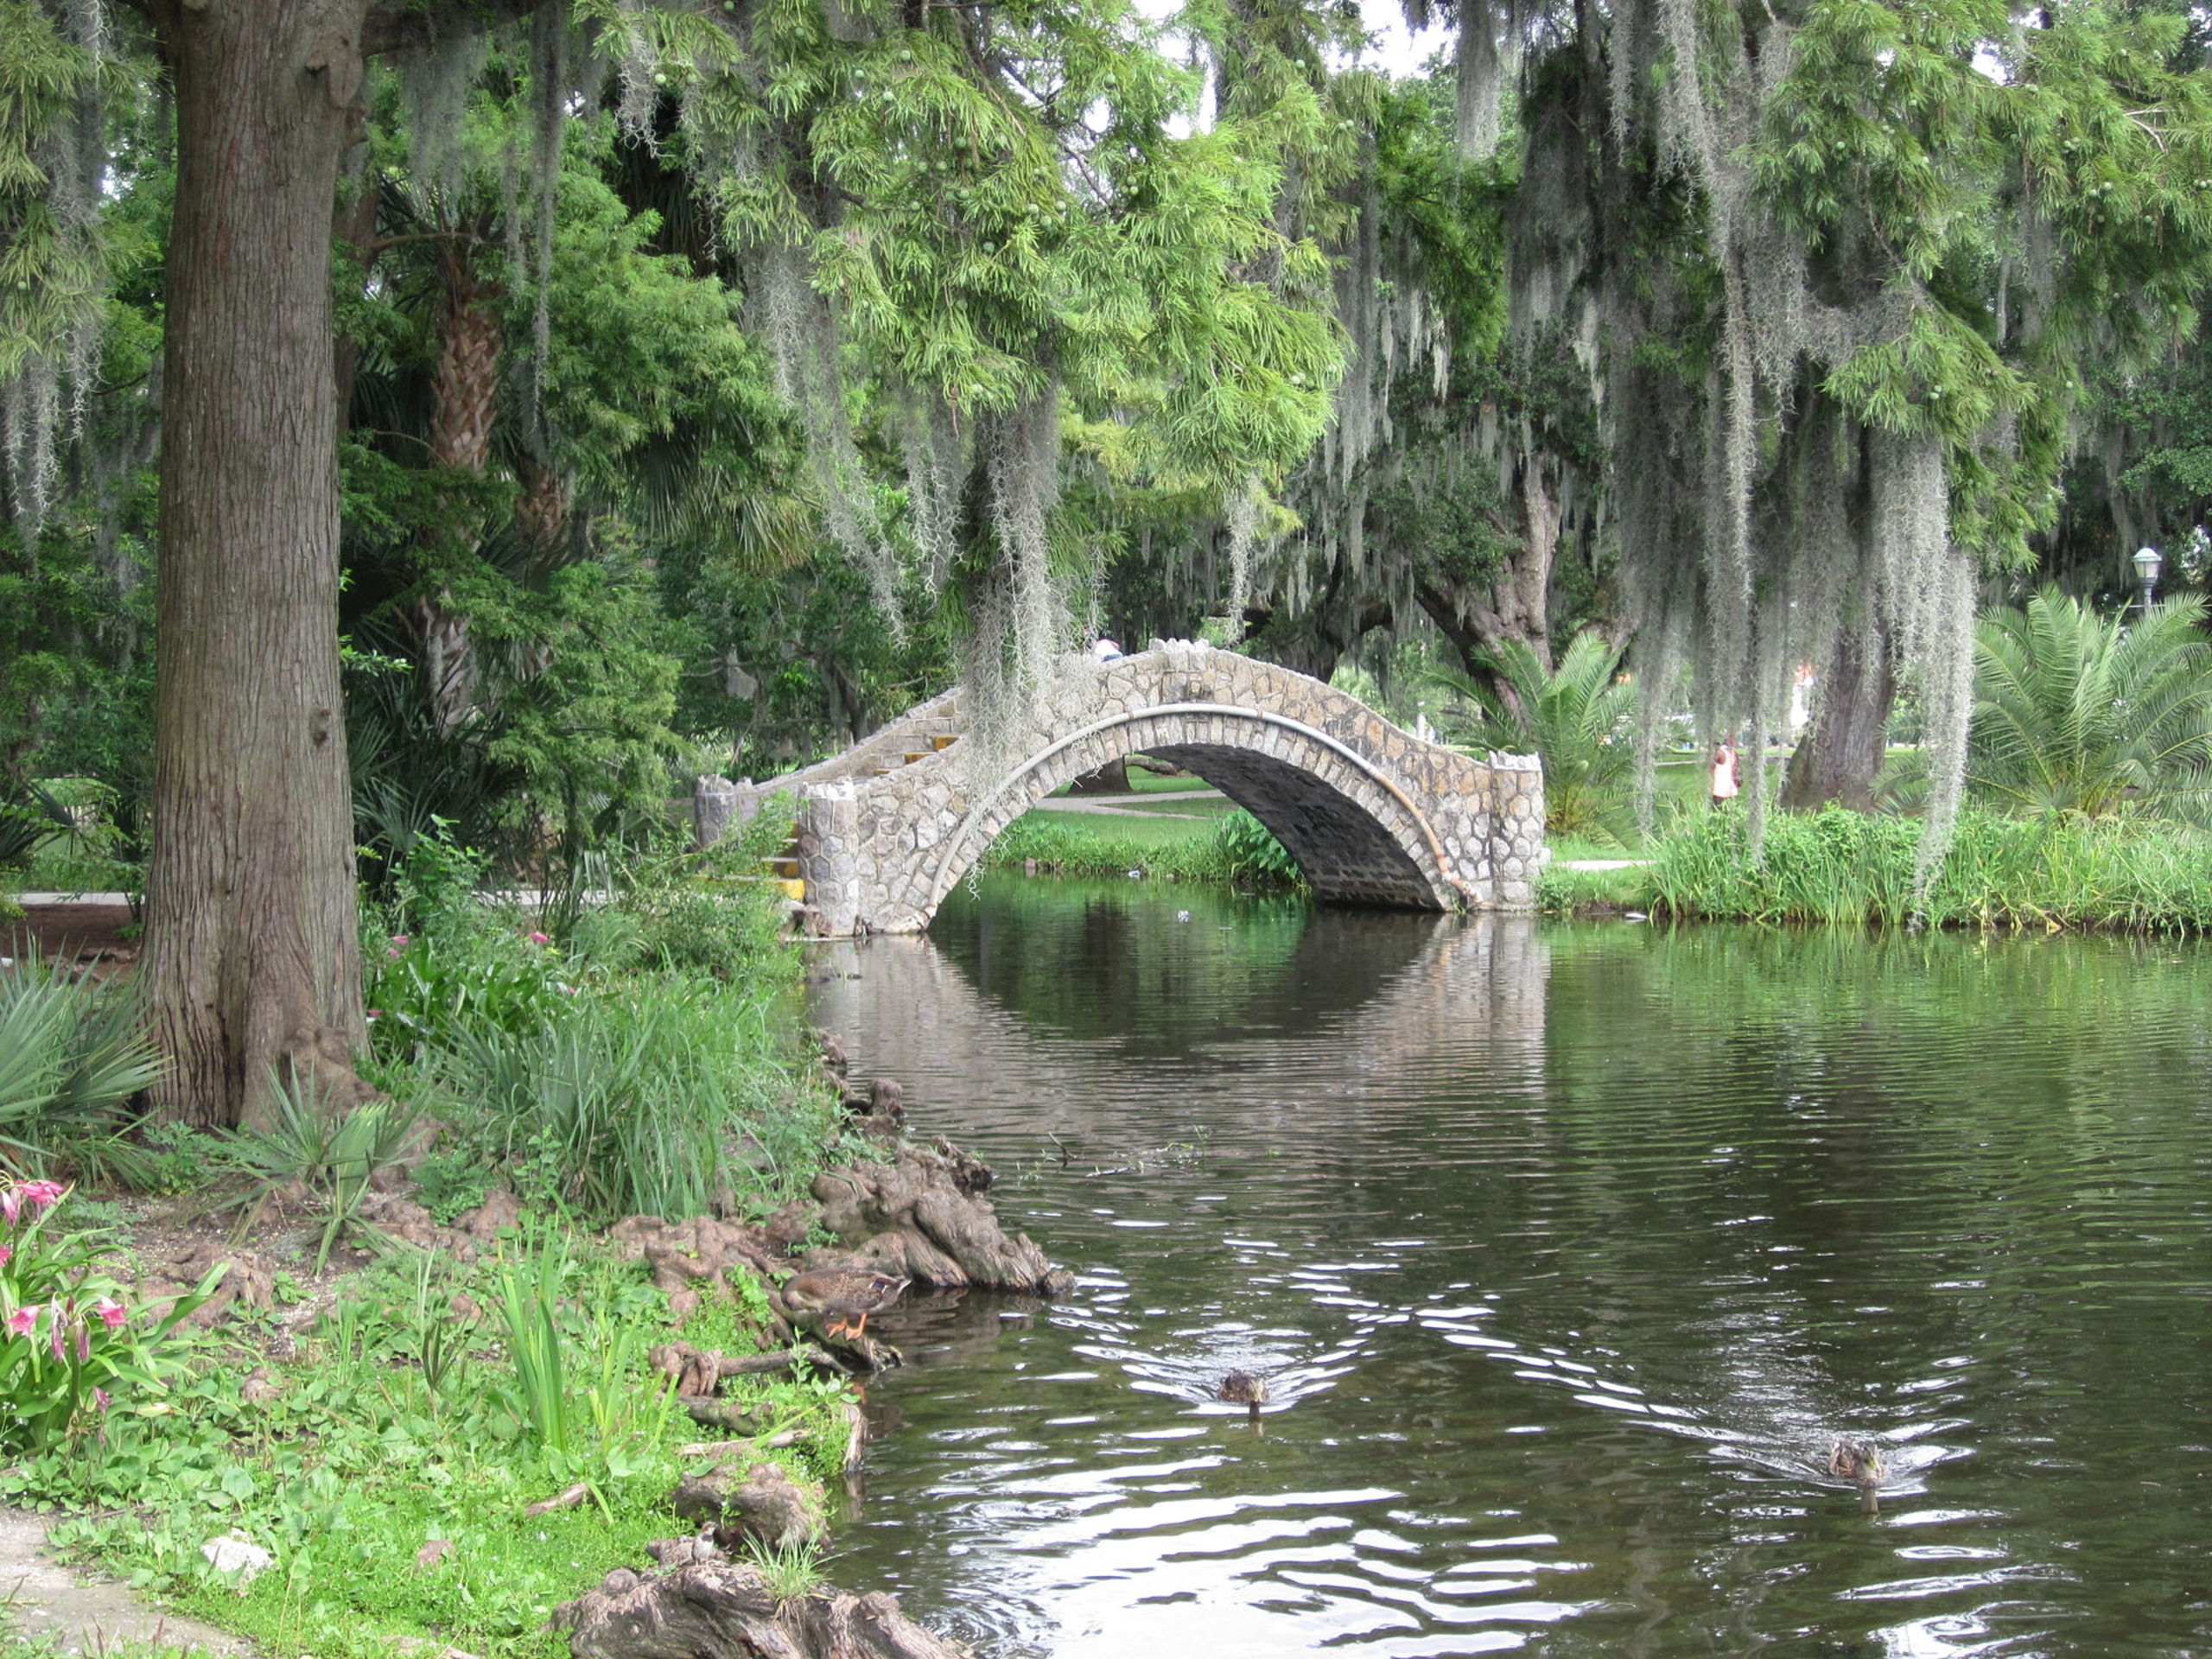 Explore the beautiful City Park in New Orleans